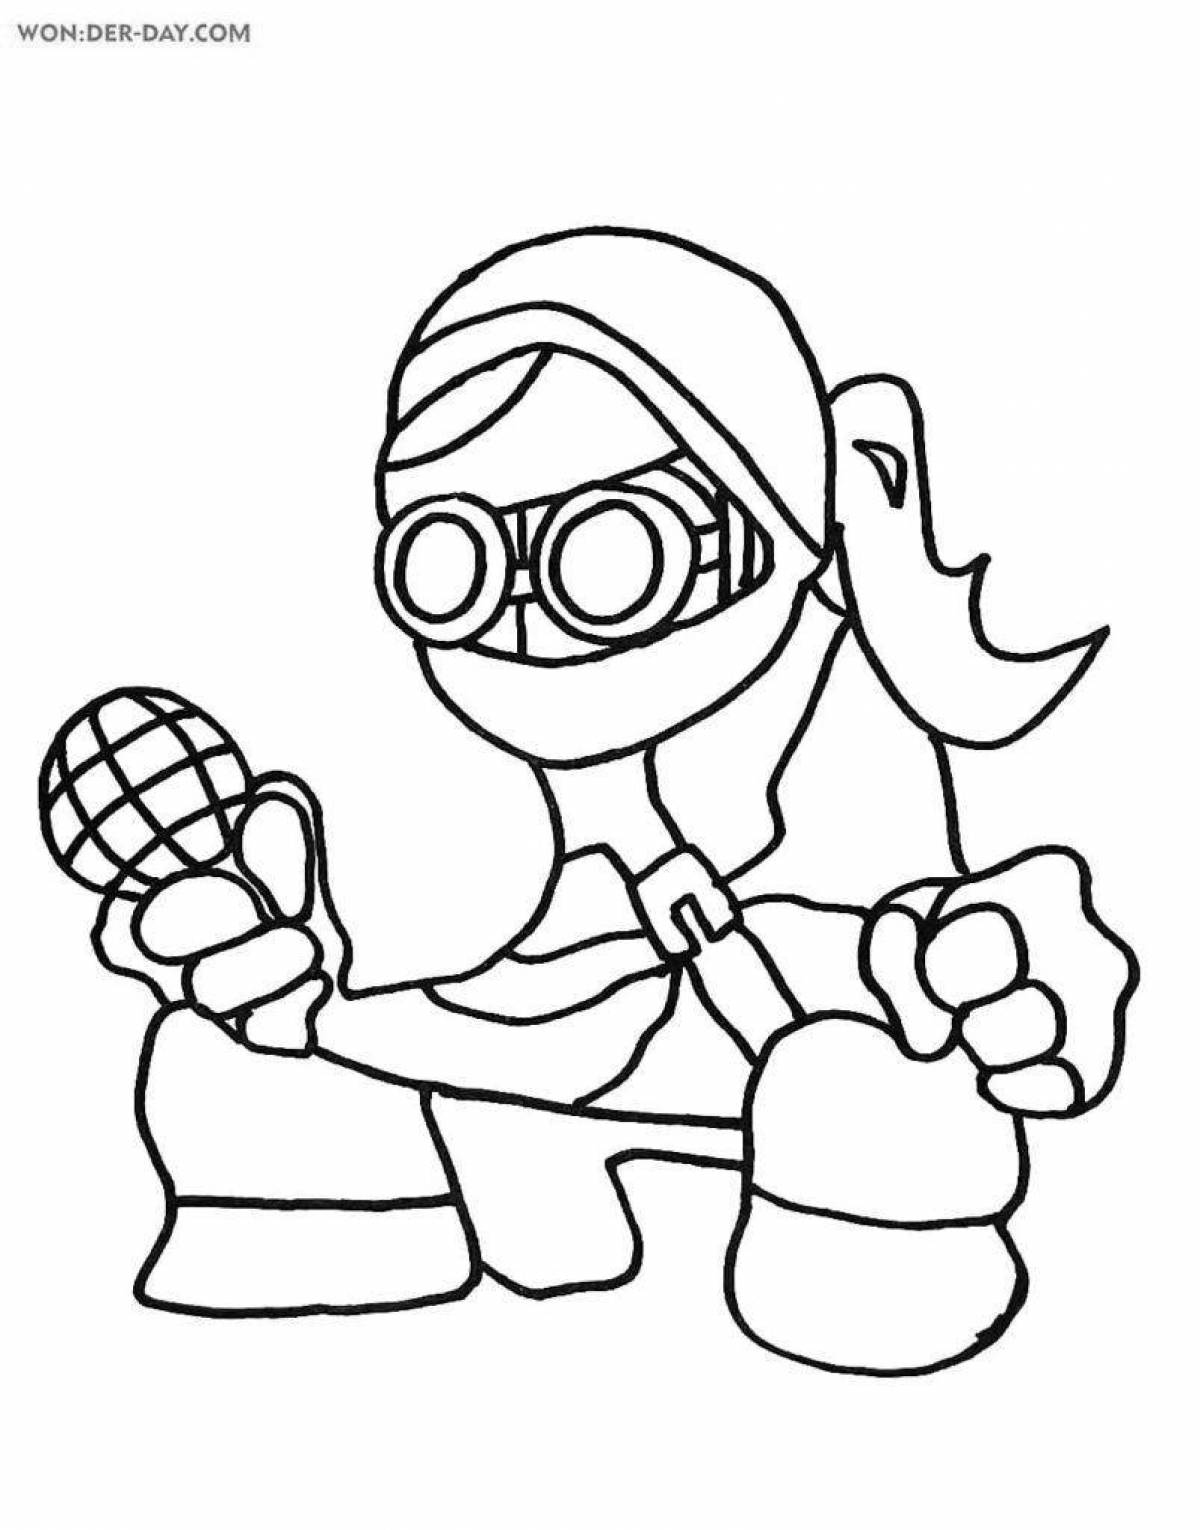 Dynamic madness combat coloring page